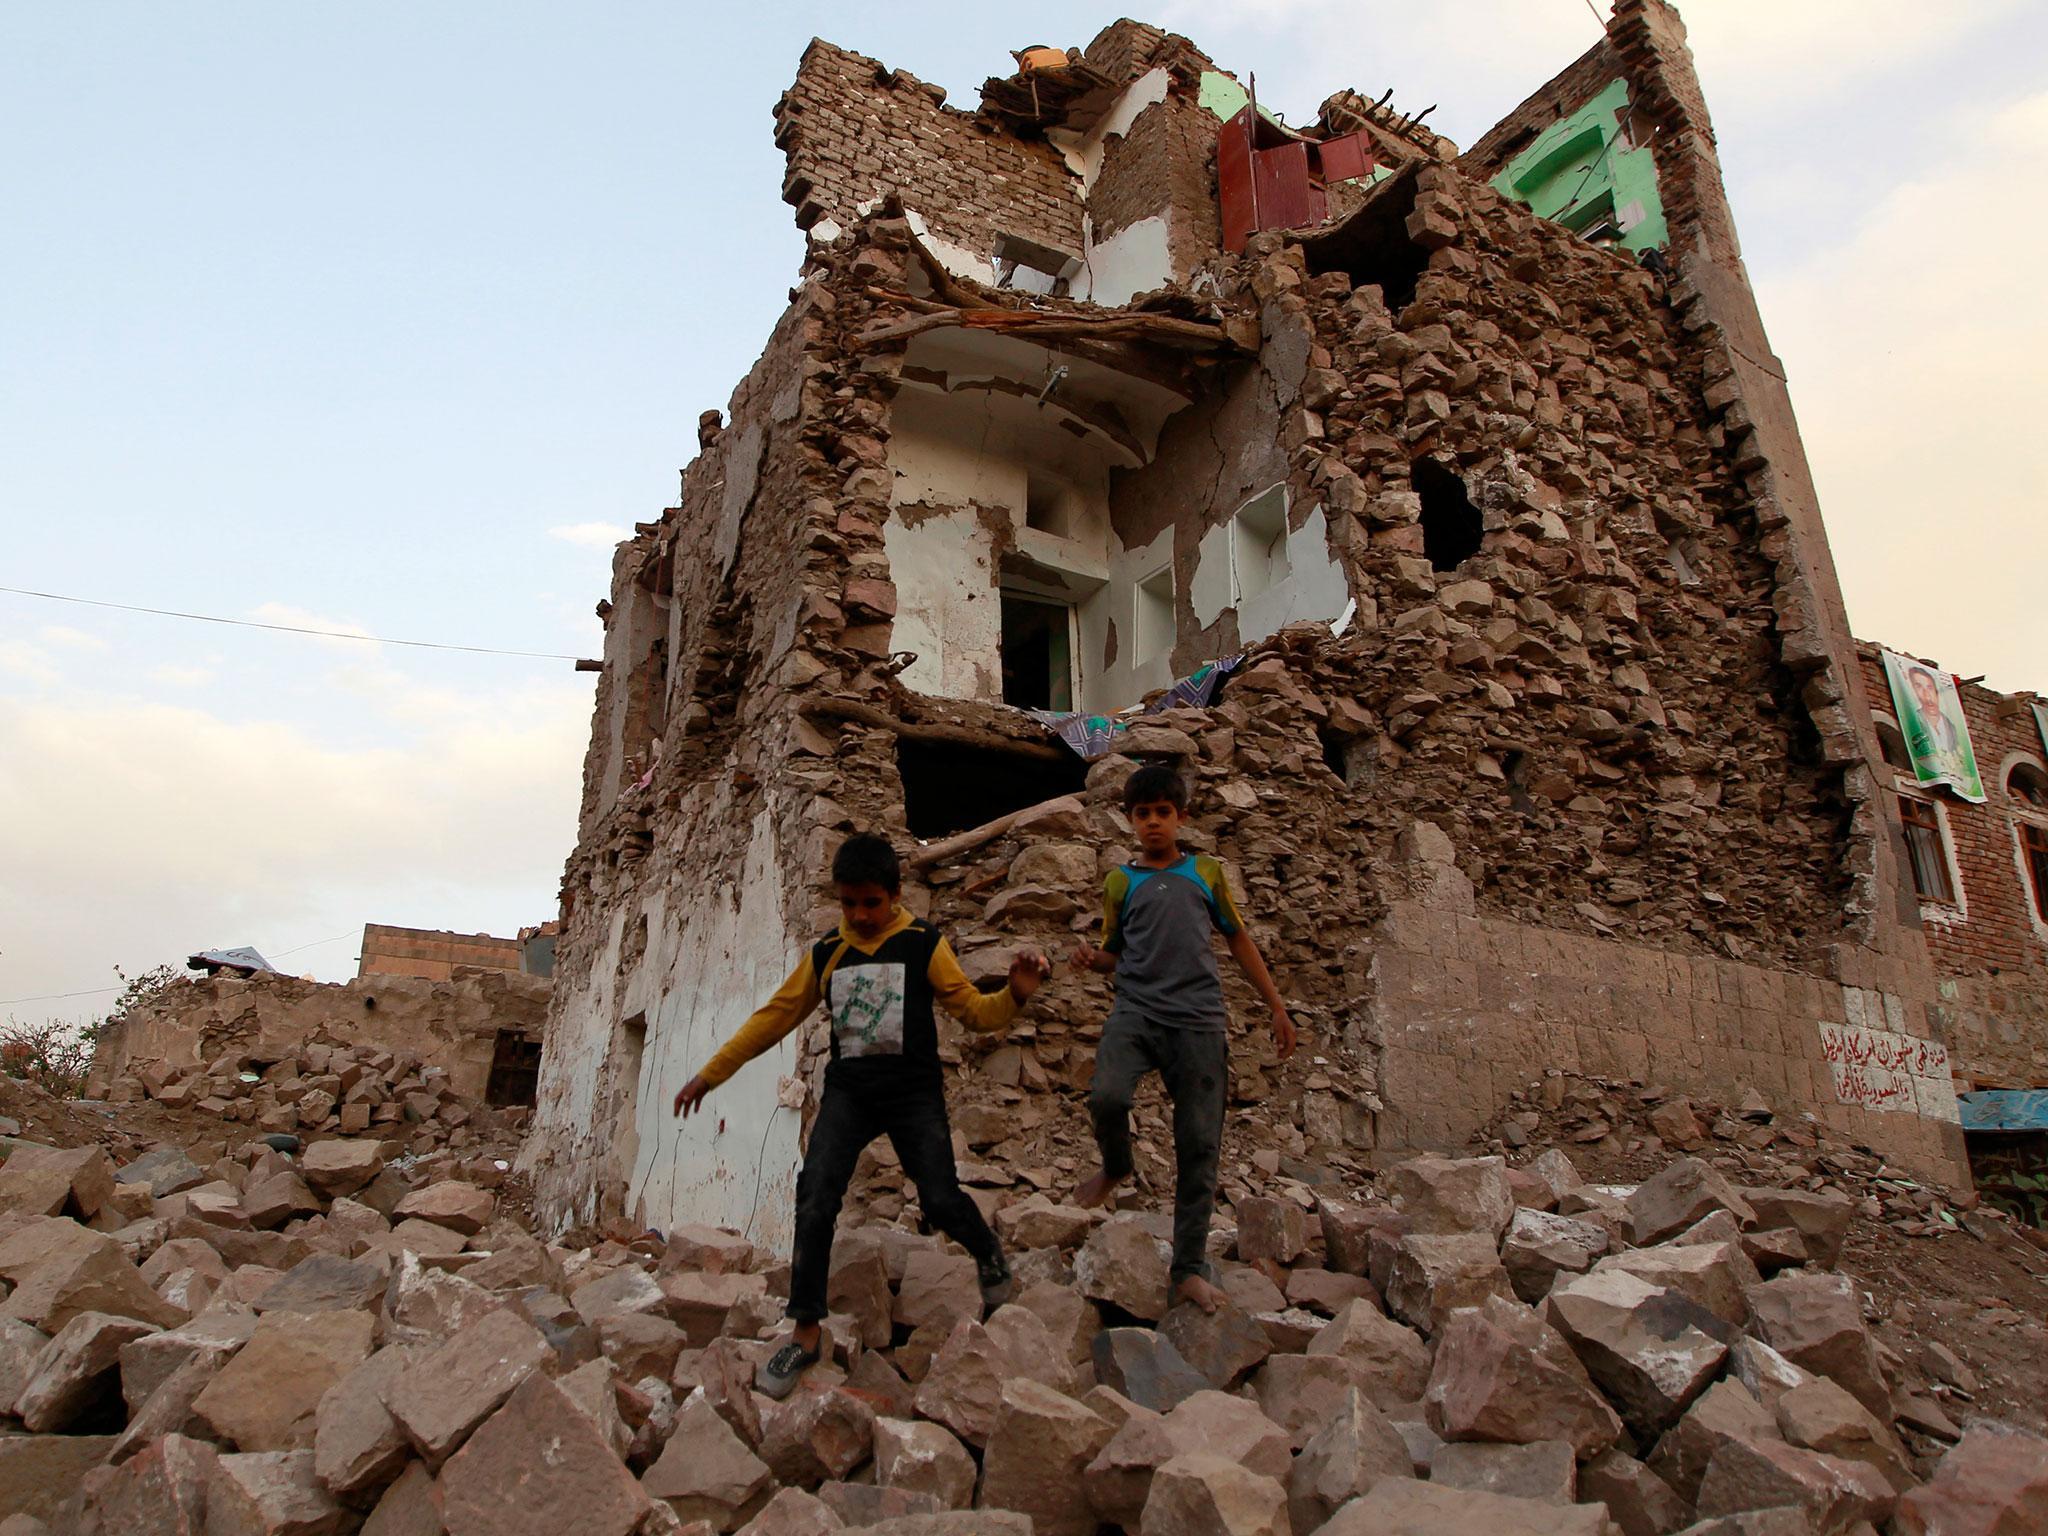 Yemeni children walk on stones in front of buildings that were damaged by air strikes carried out by the Saudi-led coalition during the past year in the Unesco-listed old city of the Yemeni capital Sanaa (MOHAMMED HUWAIS/AFP/Getty)